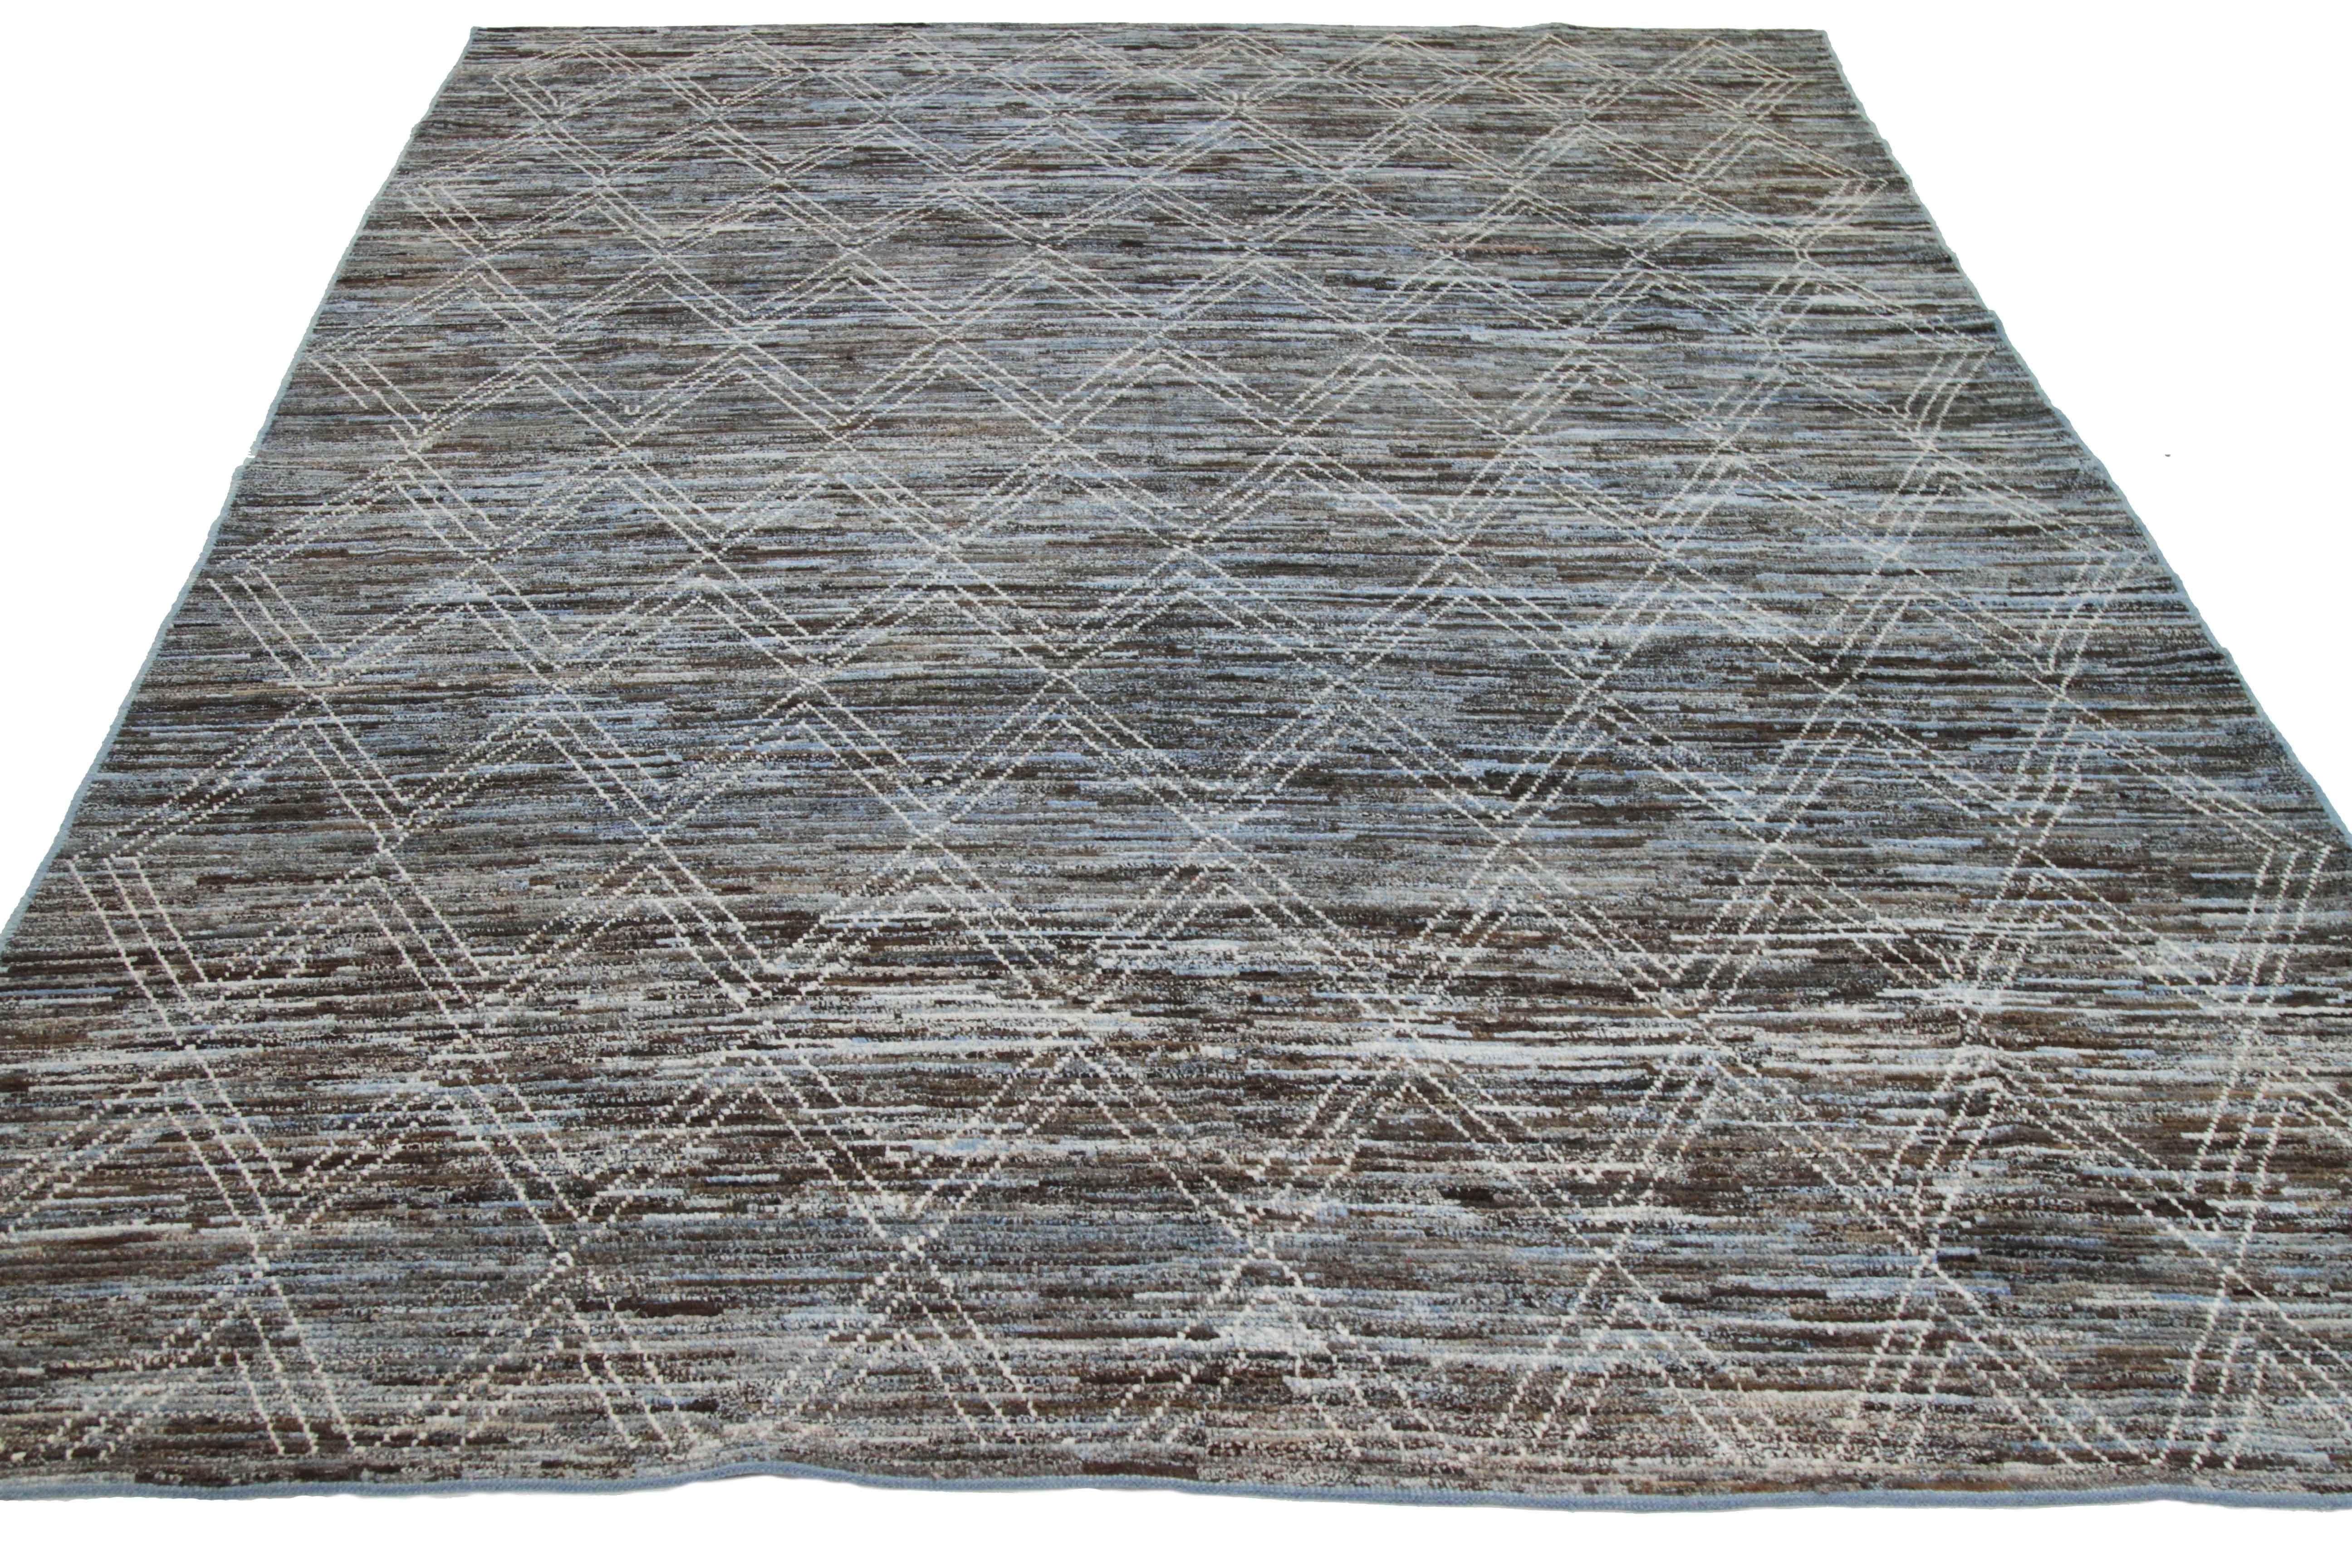 Modern Afghan rug handwoven from the finest sheep’s wool and colored with all-natural vegetable dyes that are safe for humans and pets. It’s a traditional Afghan weaving featuring a Moroccan inspired design highlighted by ivory diamonds over a blue